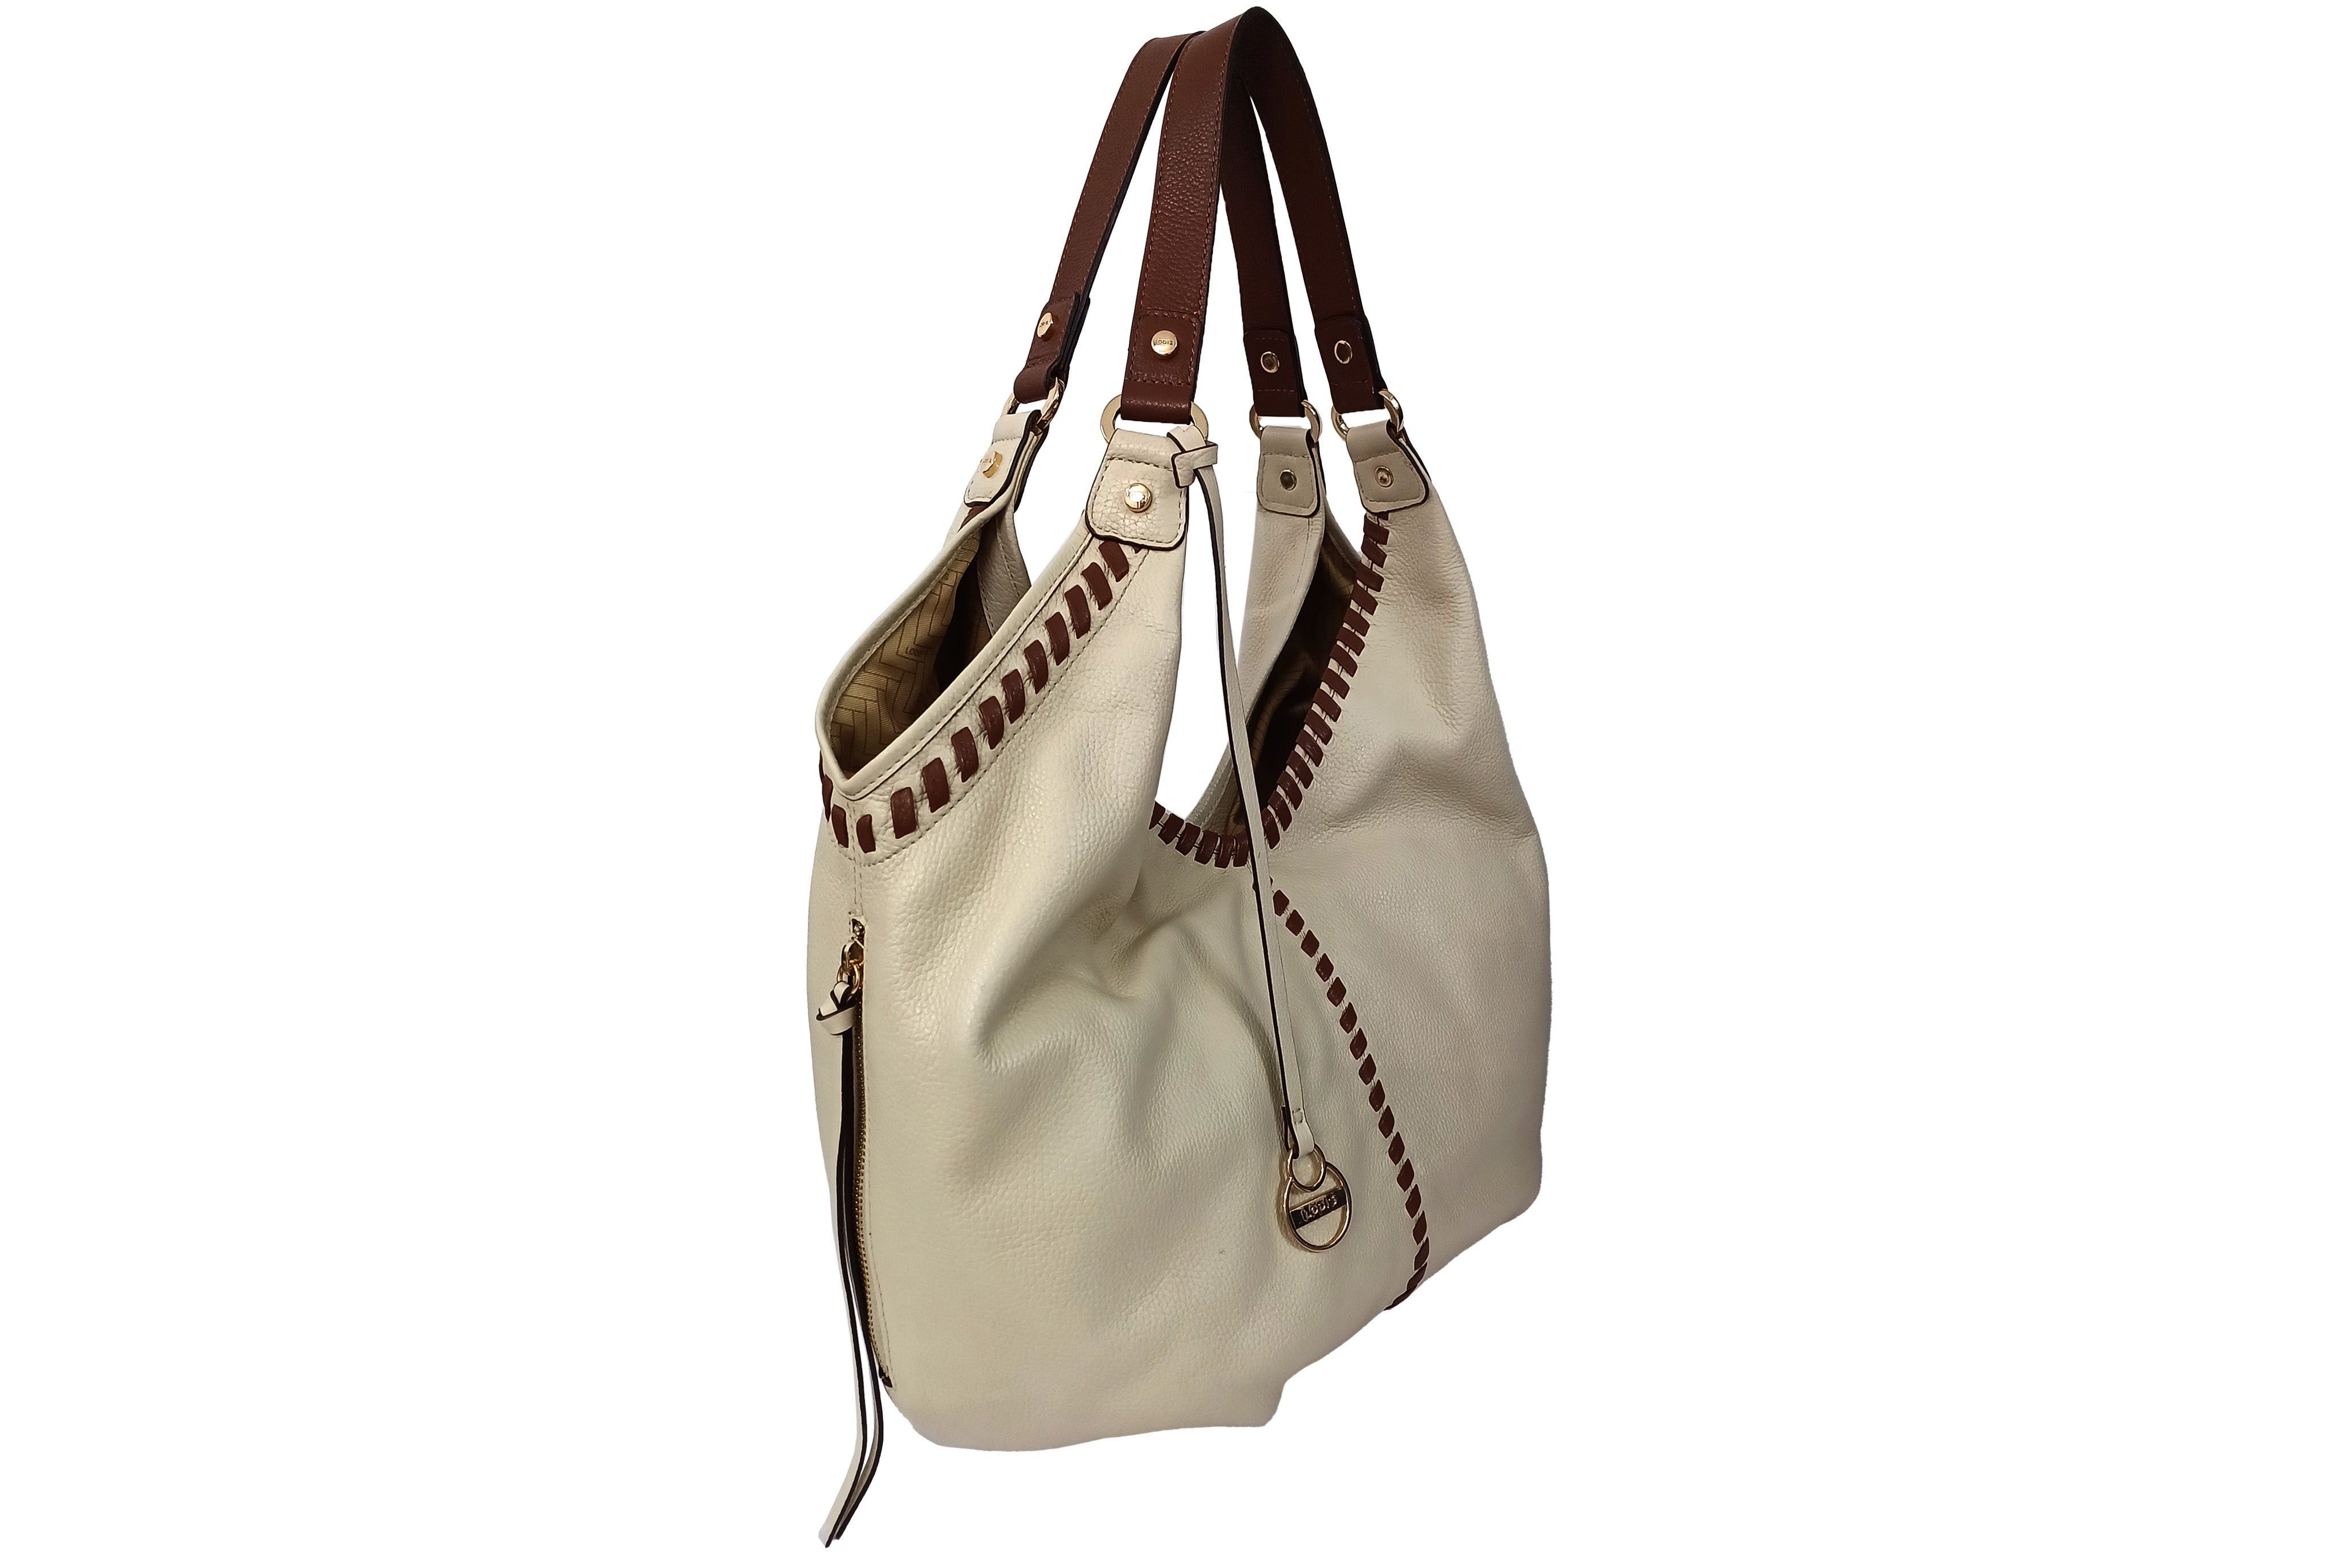 Louis Cardy Large Tote Handbag Leather Brown